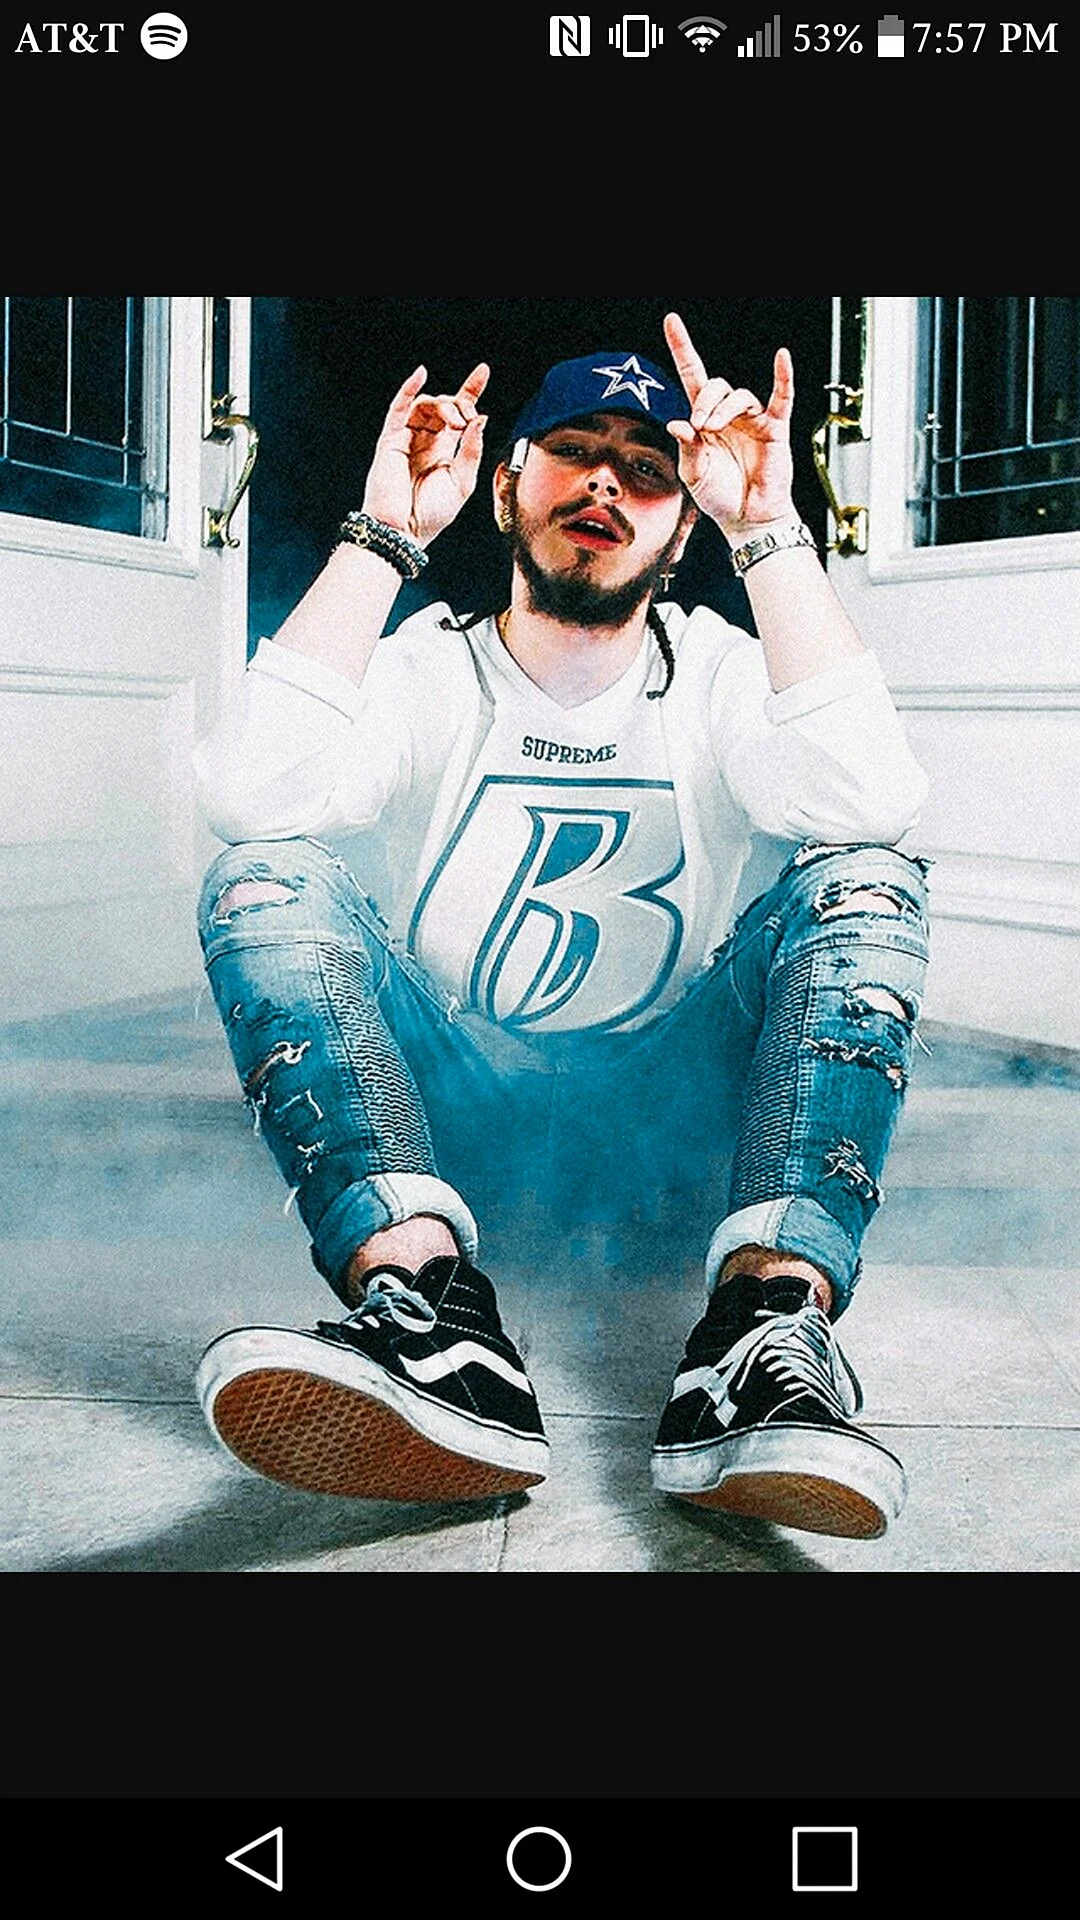 Post Malone Cute Wallpaper For iPhone